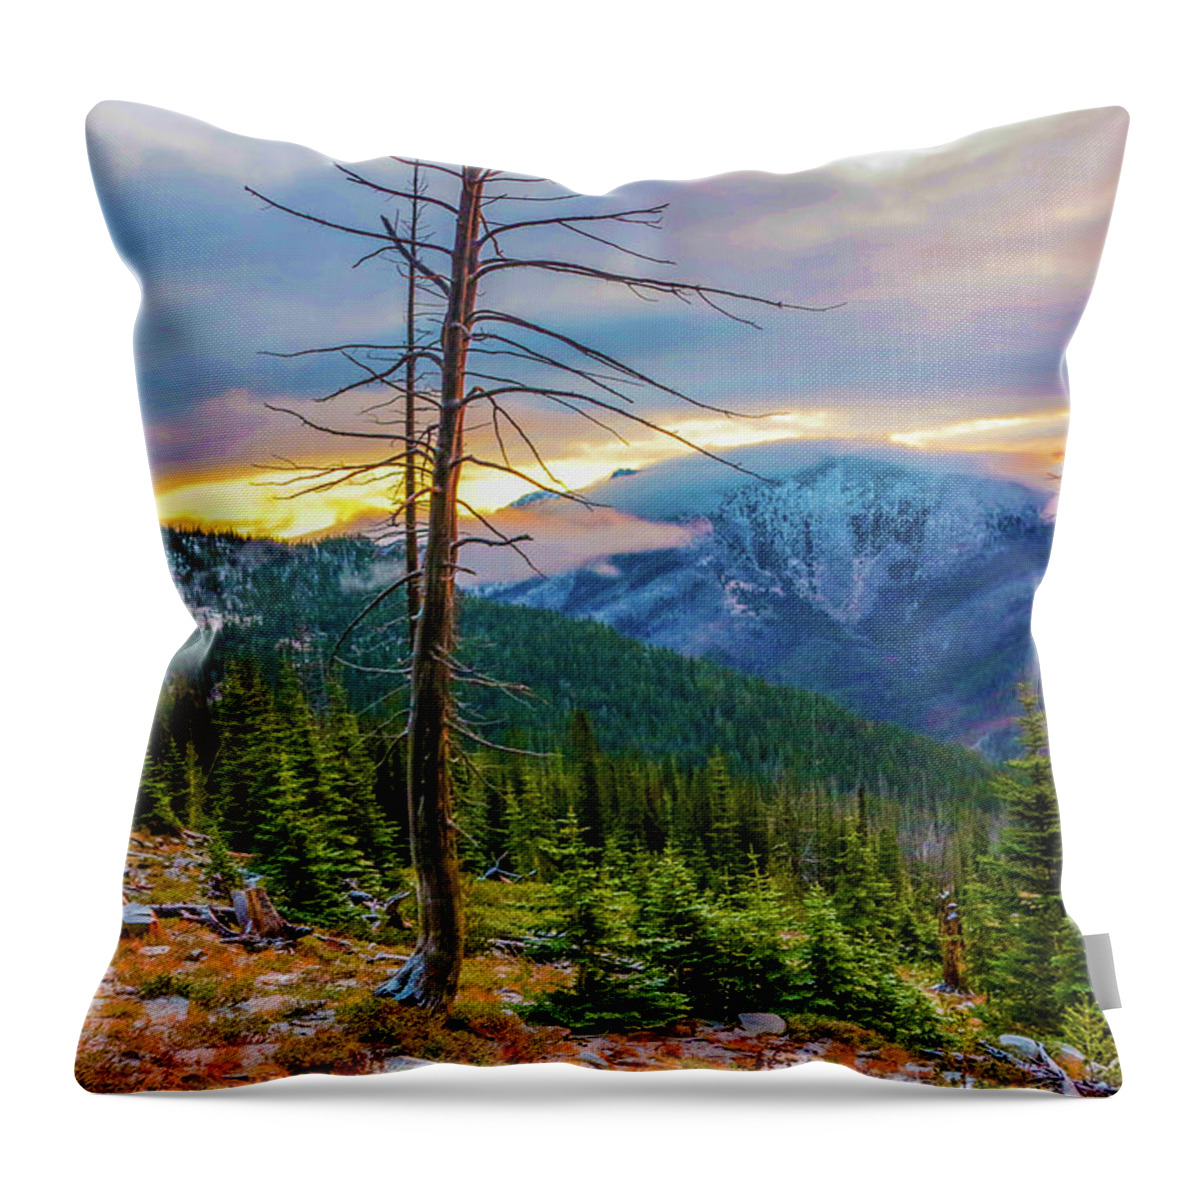 Landscape Throw Pillow featuring the photograph Colorfull Morning by Jason Brooks